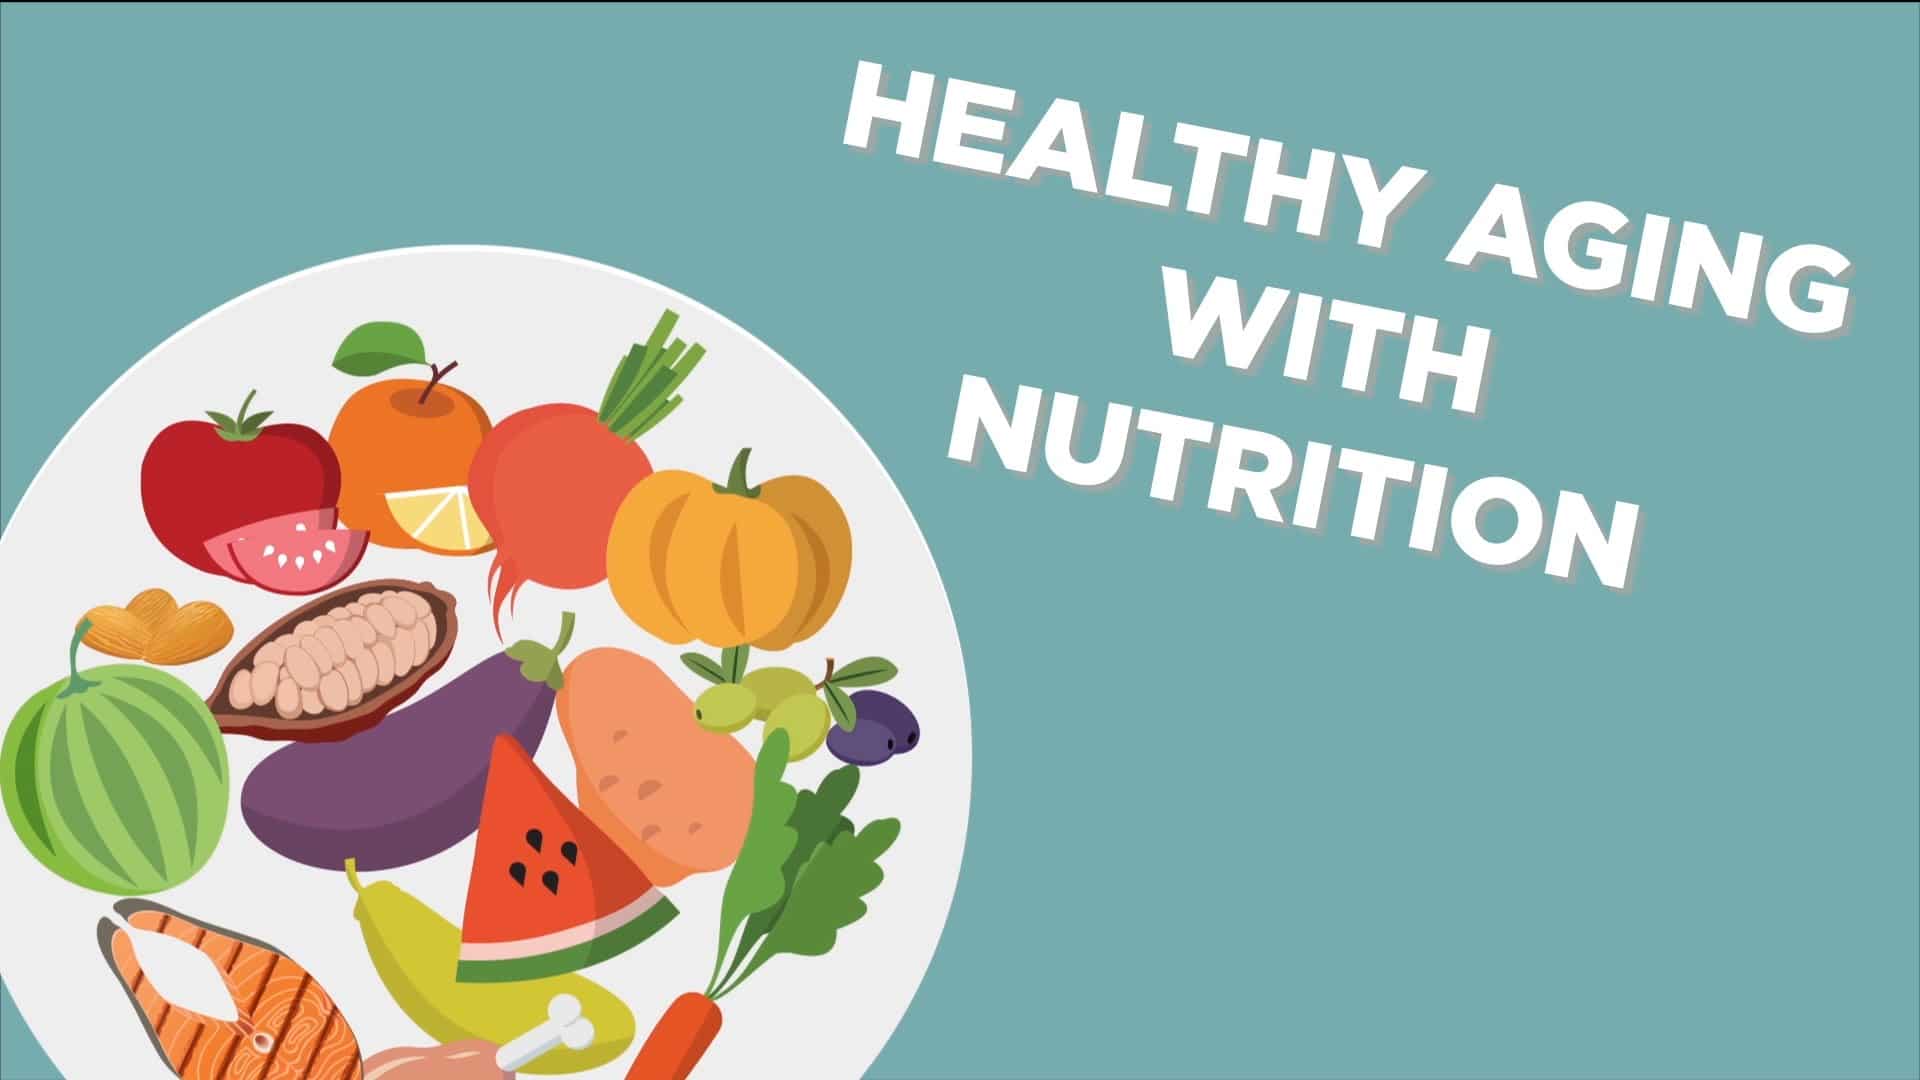 Plate of healthy food with text "healthy aging with nutrition."